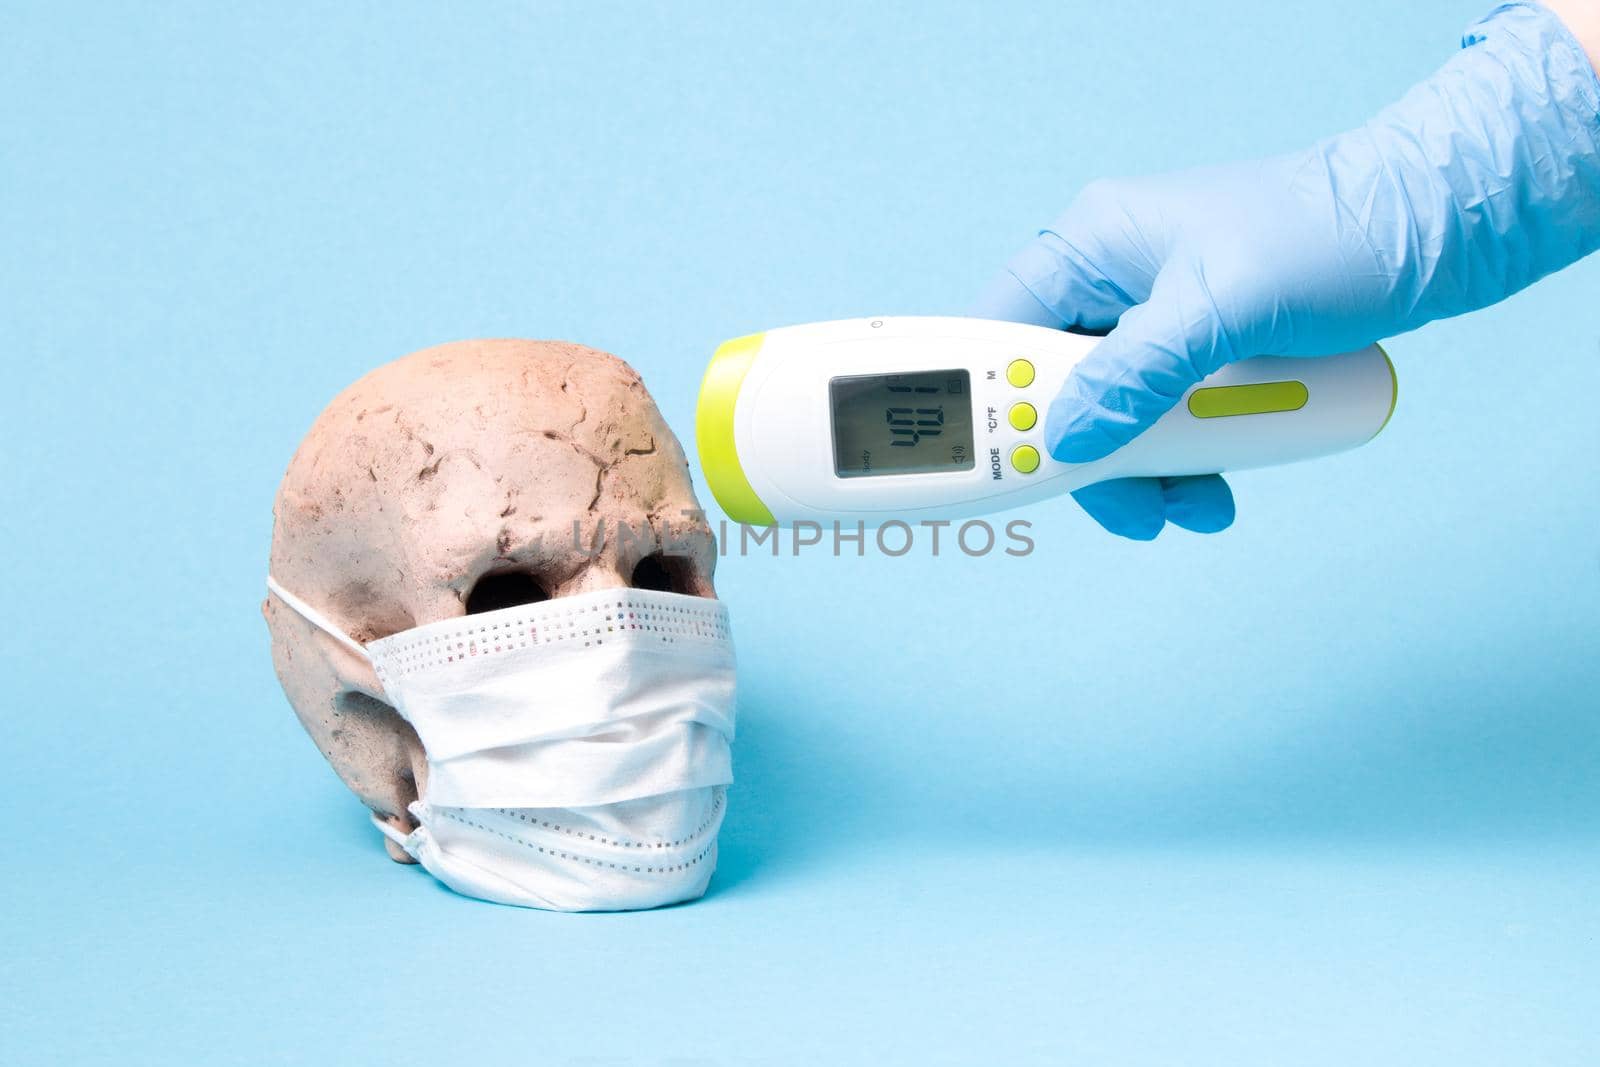 ceramic skull mask and a hand in a disposable medical rubber blue glove with infrared non-contact thermometer on a blue background, copy space, high temperature 40 degrees Celsius by natashko